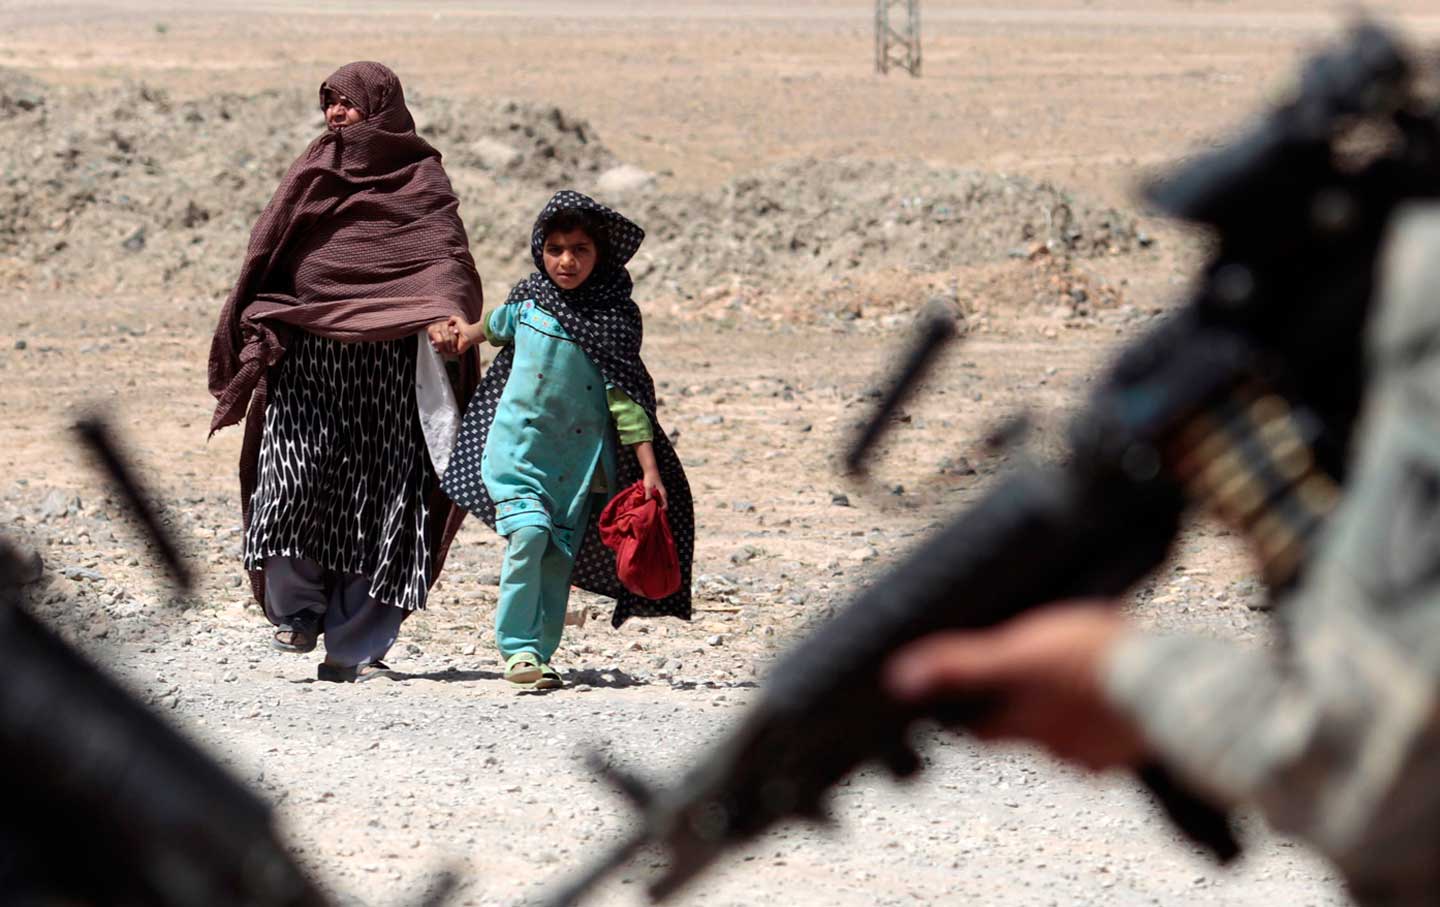 An Afghan woman and girl approach American troops in Kandahar.